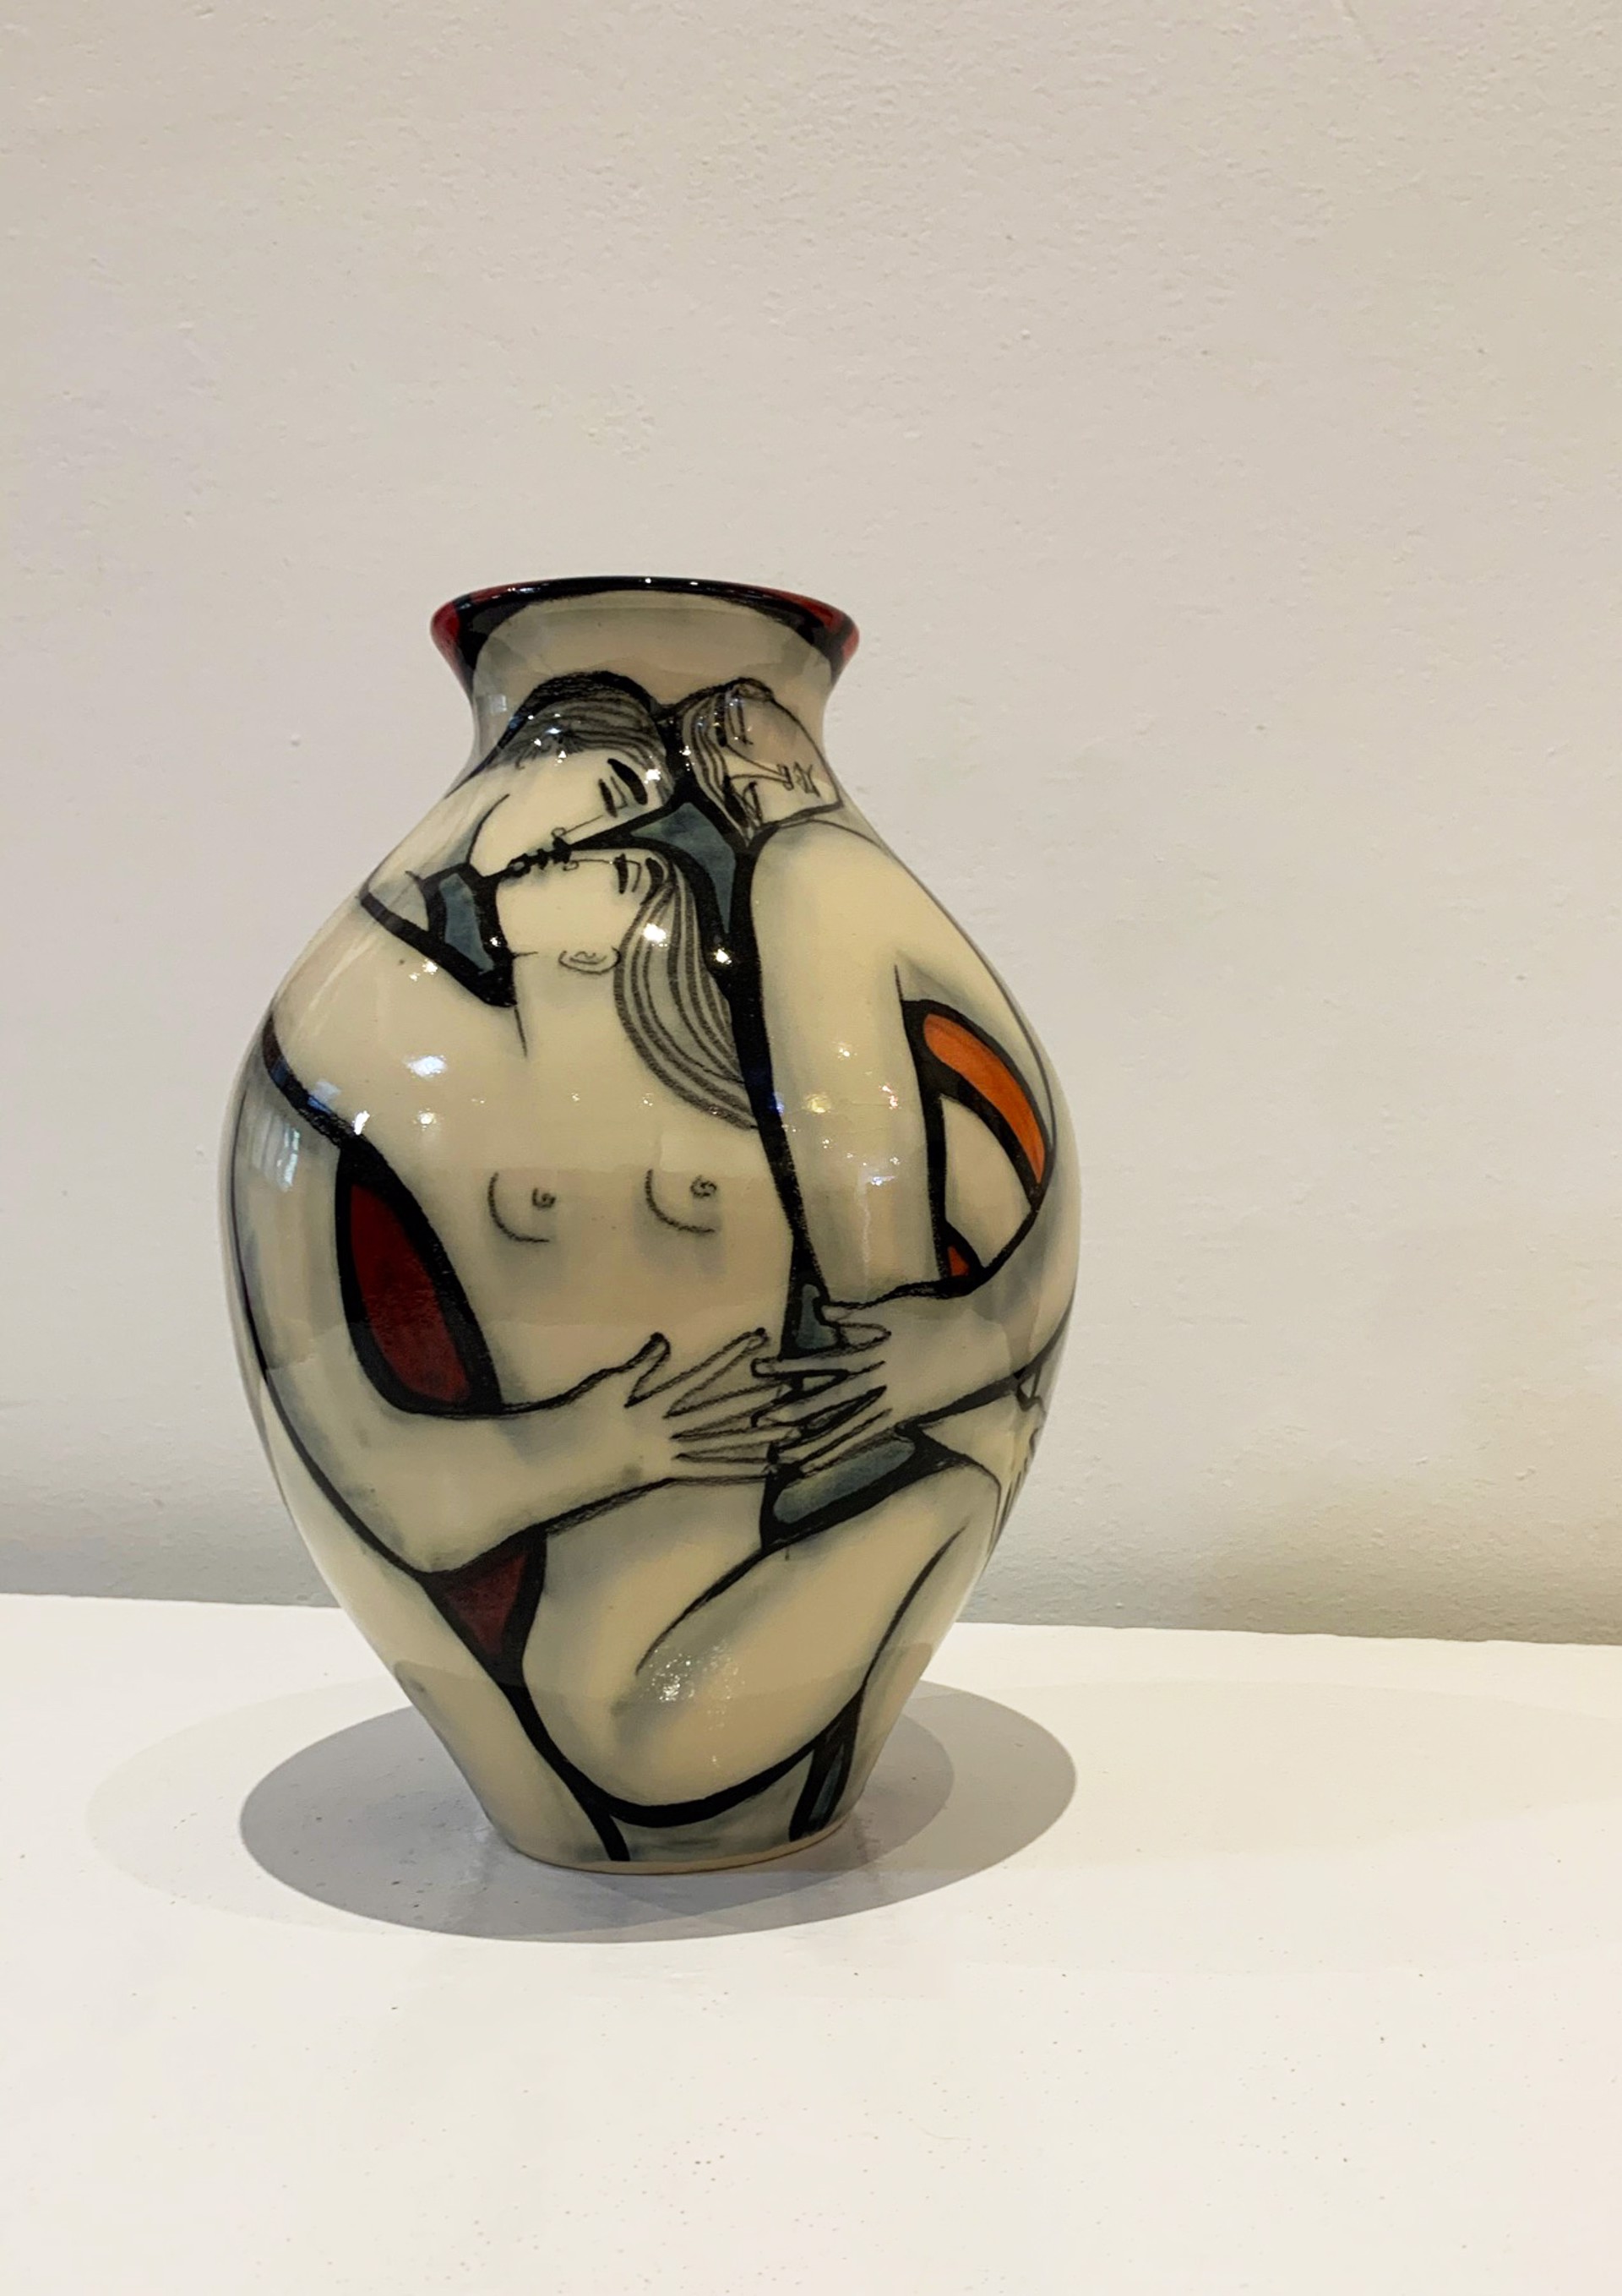 Vase #27 by Ken and Tina Riesterer